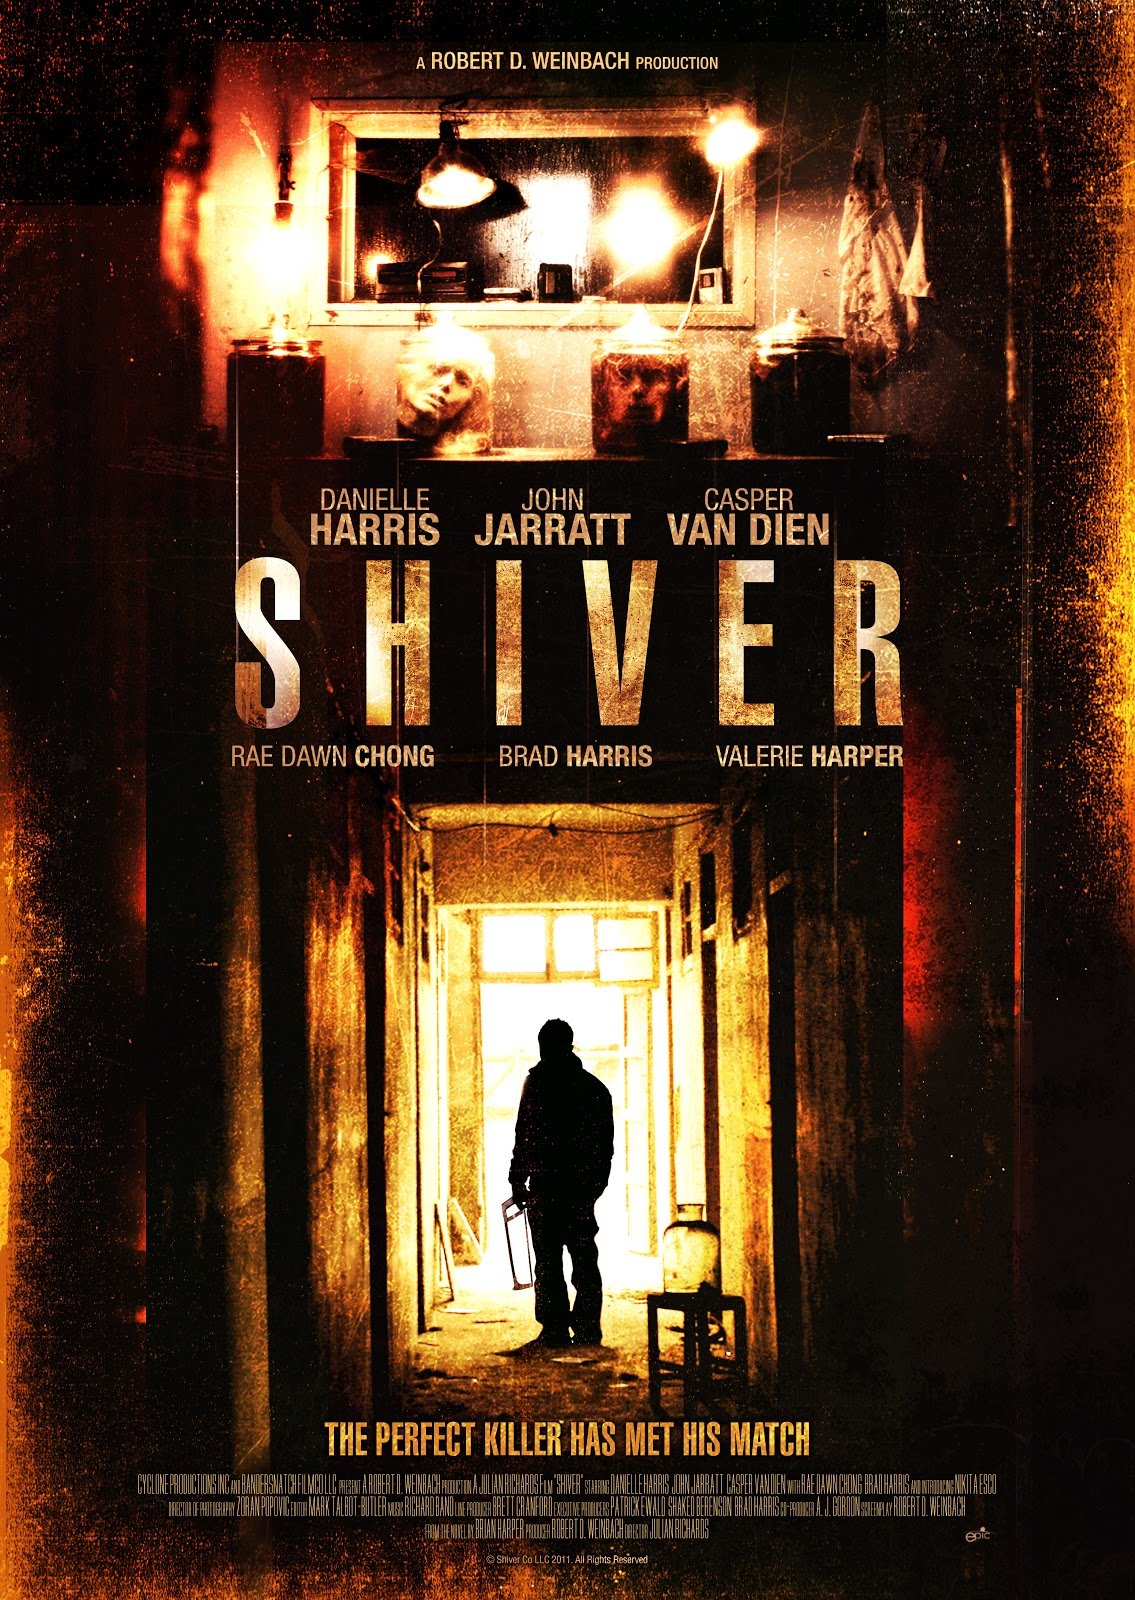 Poster of the movie Shiver